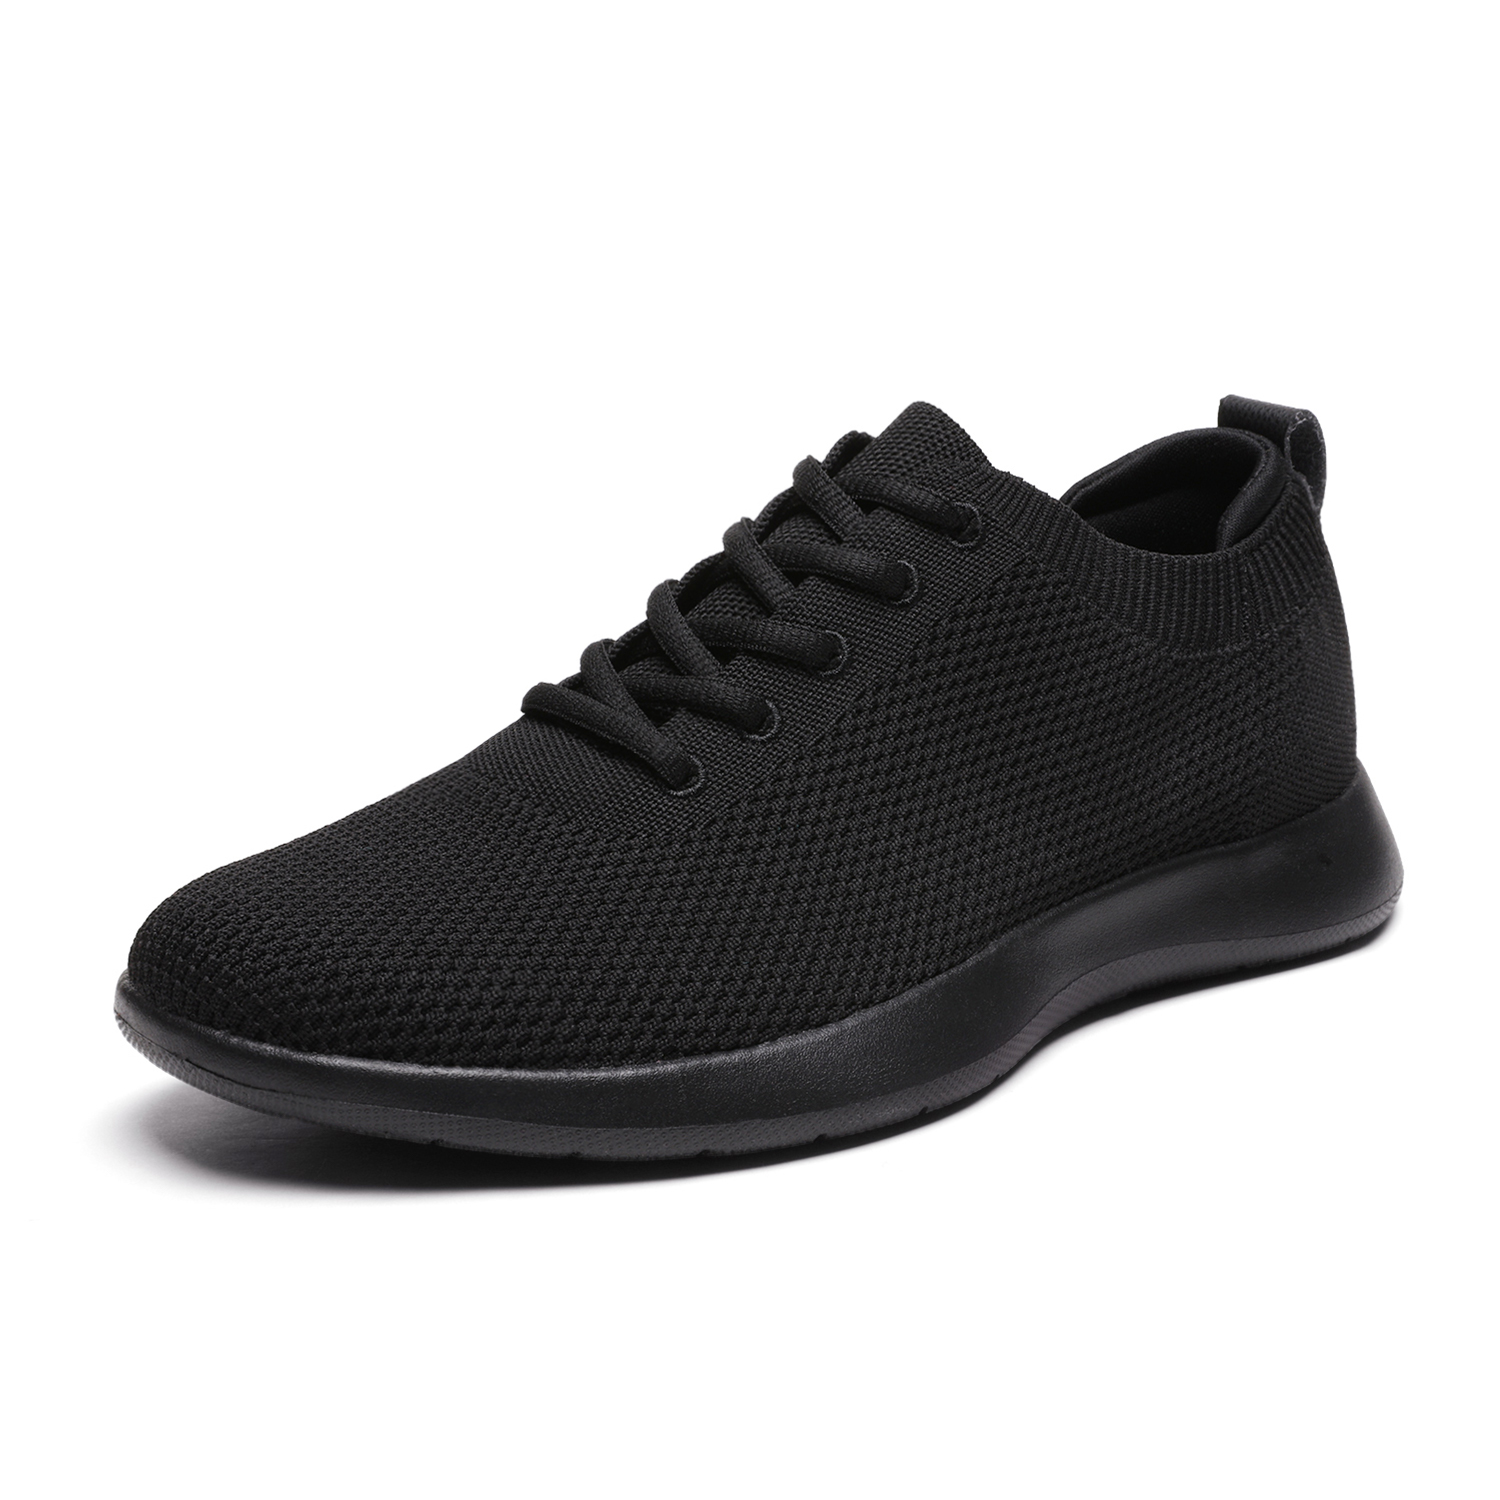 Bruno Marc Mens Fashion Comfort Walking Shoes Breathable Fashion Sneaker Casual Shoe Size 6.5-13 LEGEND-2 ALL/BLACK Size 10.5 - image 1 of 5